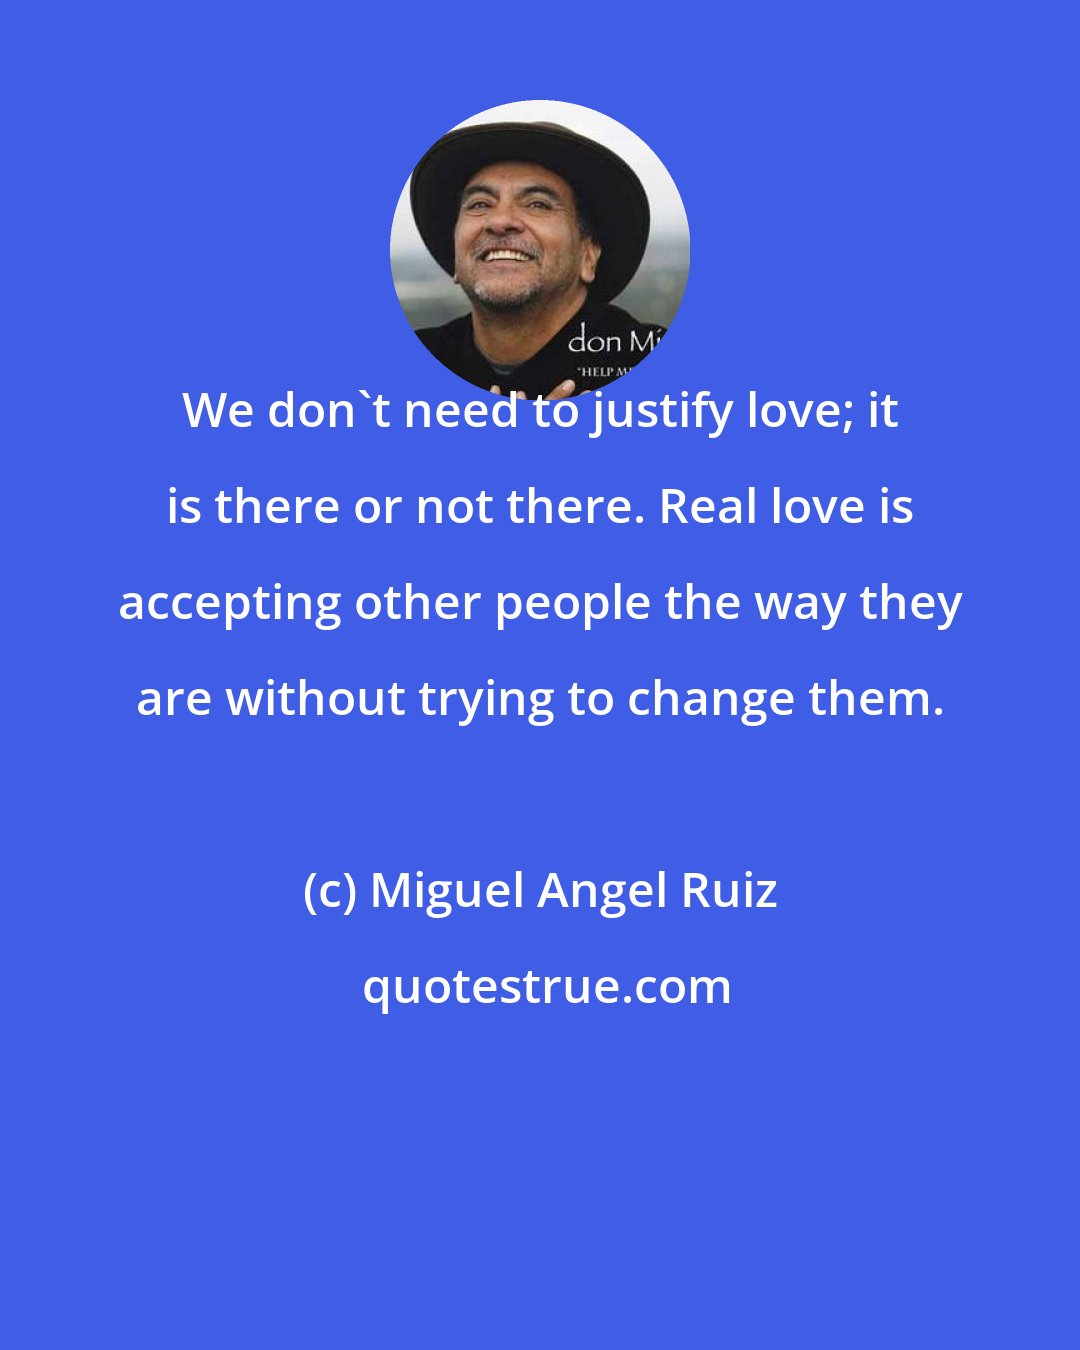 Miguel Angel Ruiz: We don't need to justify love; it is there or not there. Real love is accepting other people the way they are without trying to change them.